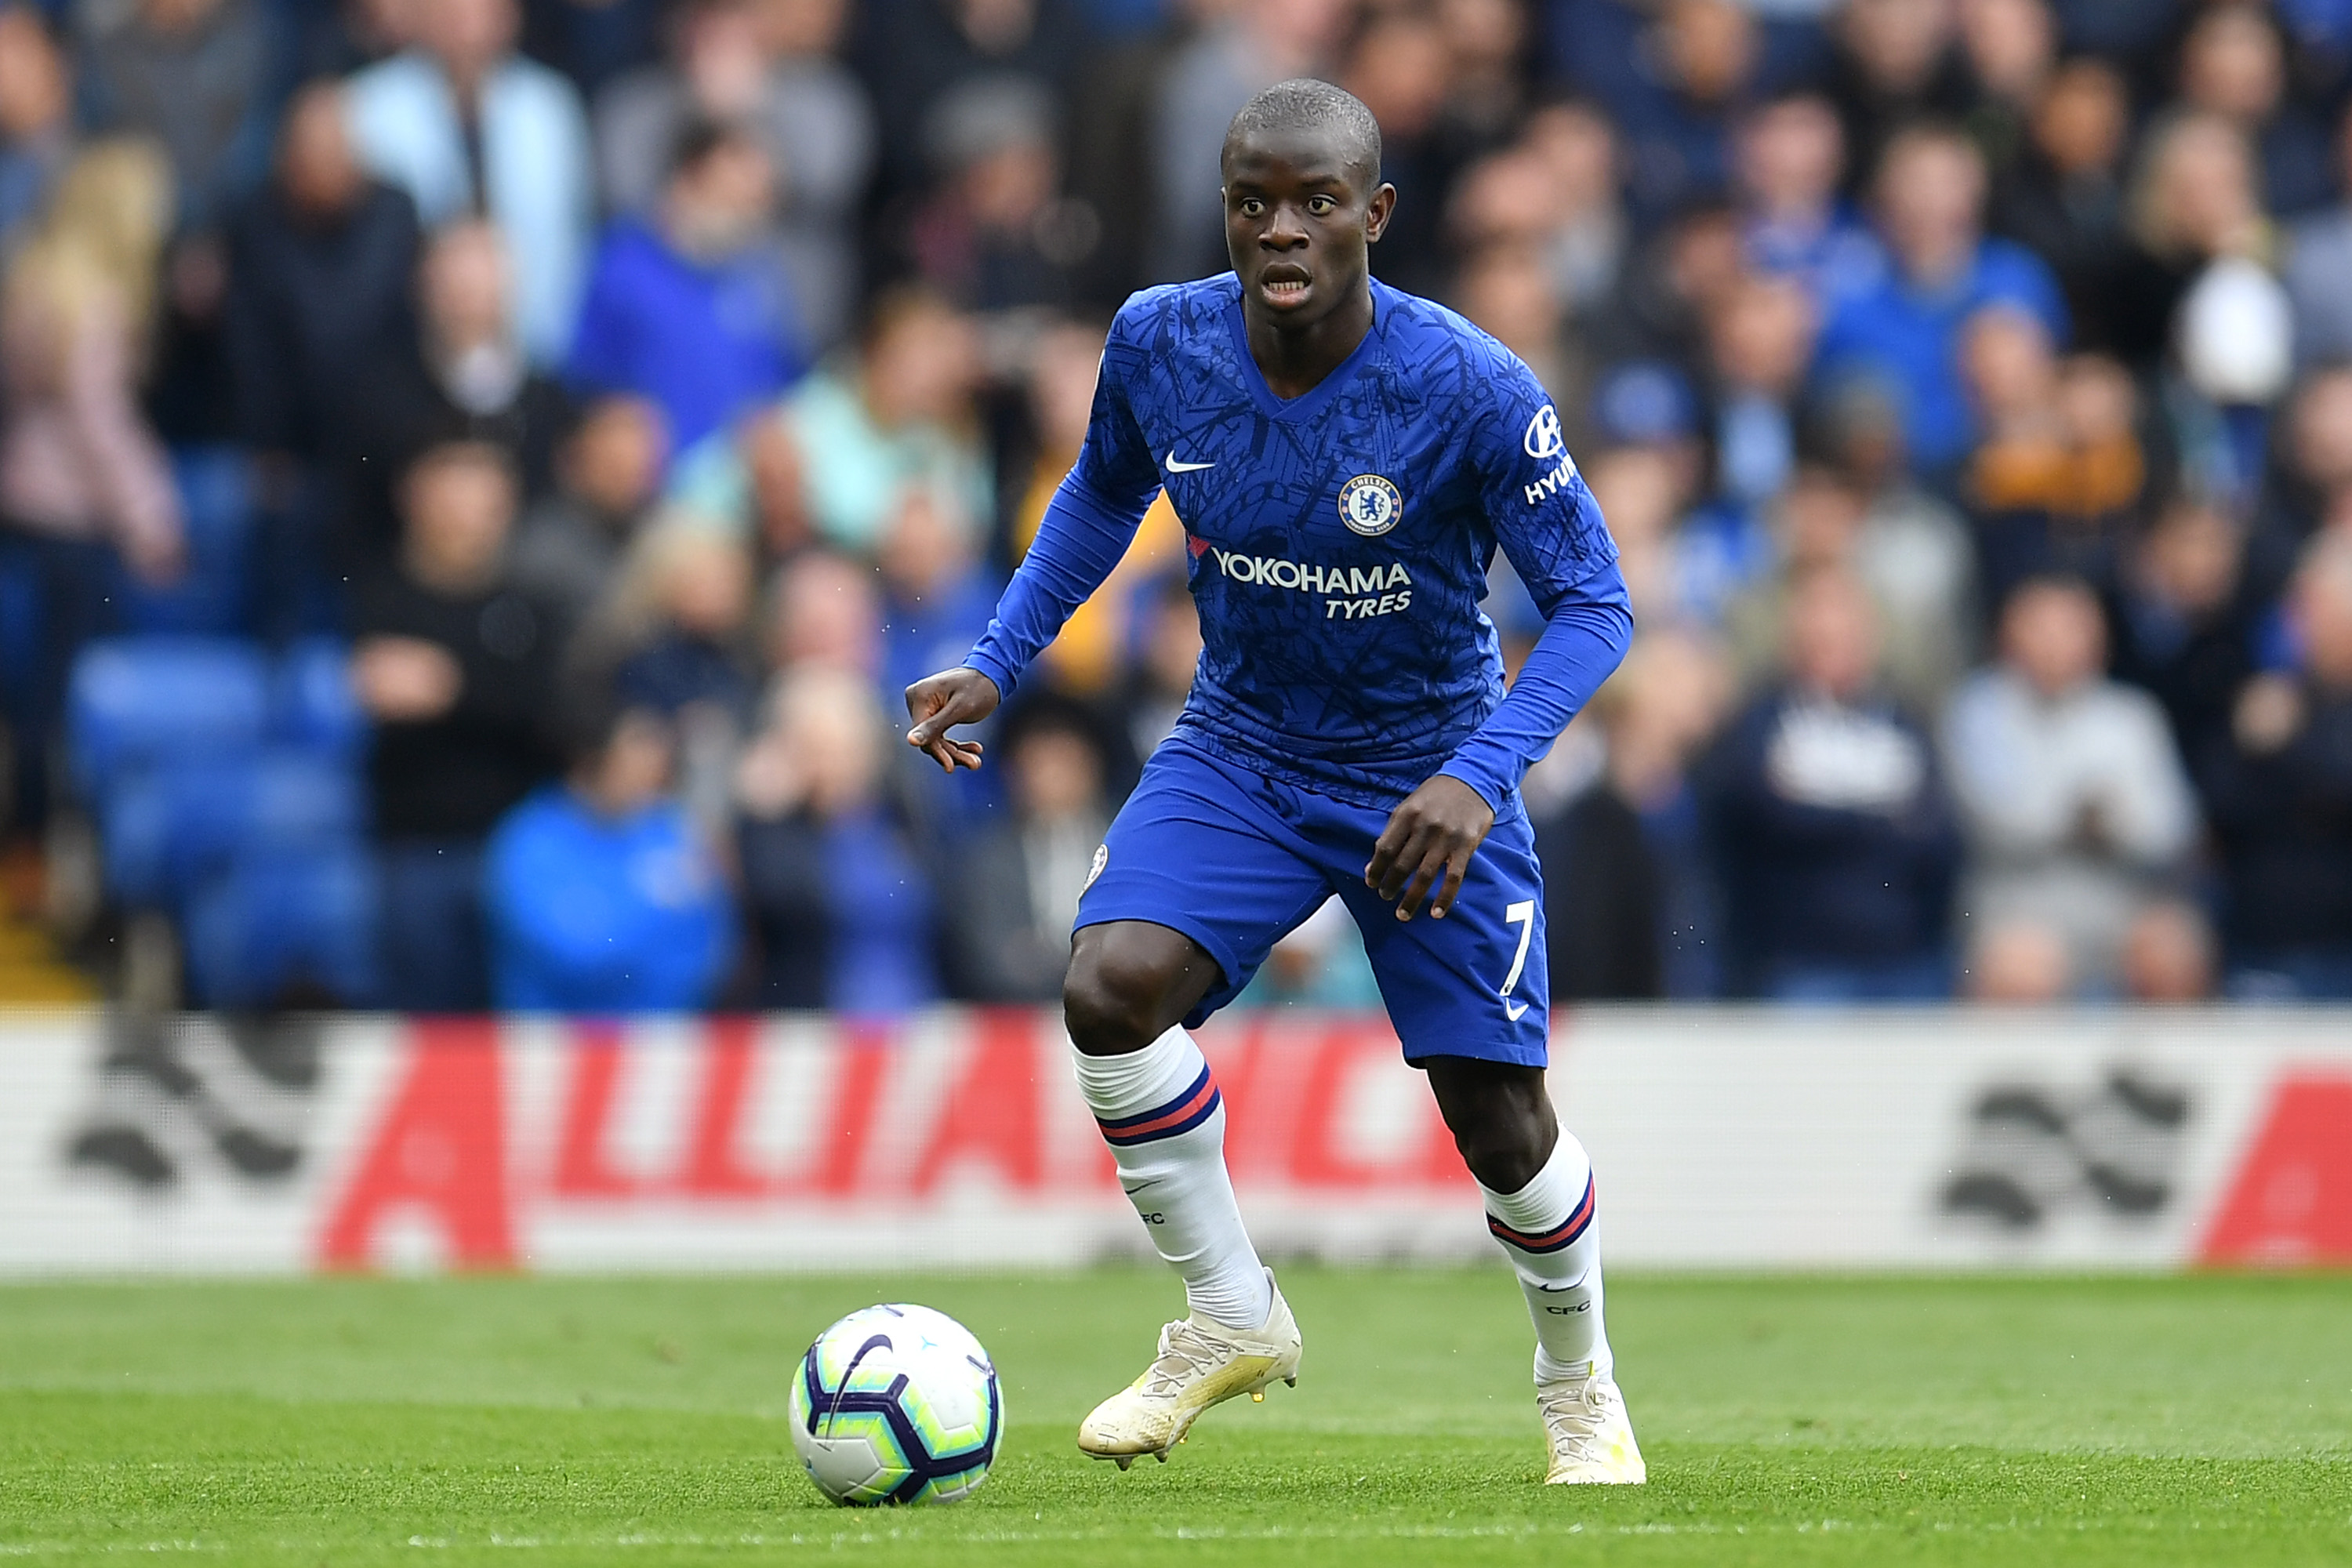 Kante is likely to miss out for Chelsea (Photo by Justin Setterfield/Getty Images)